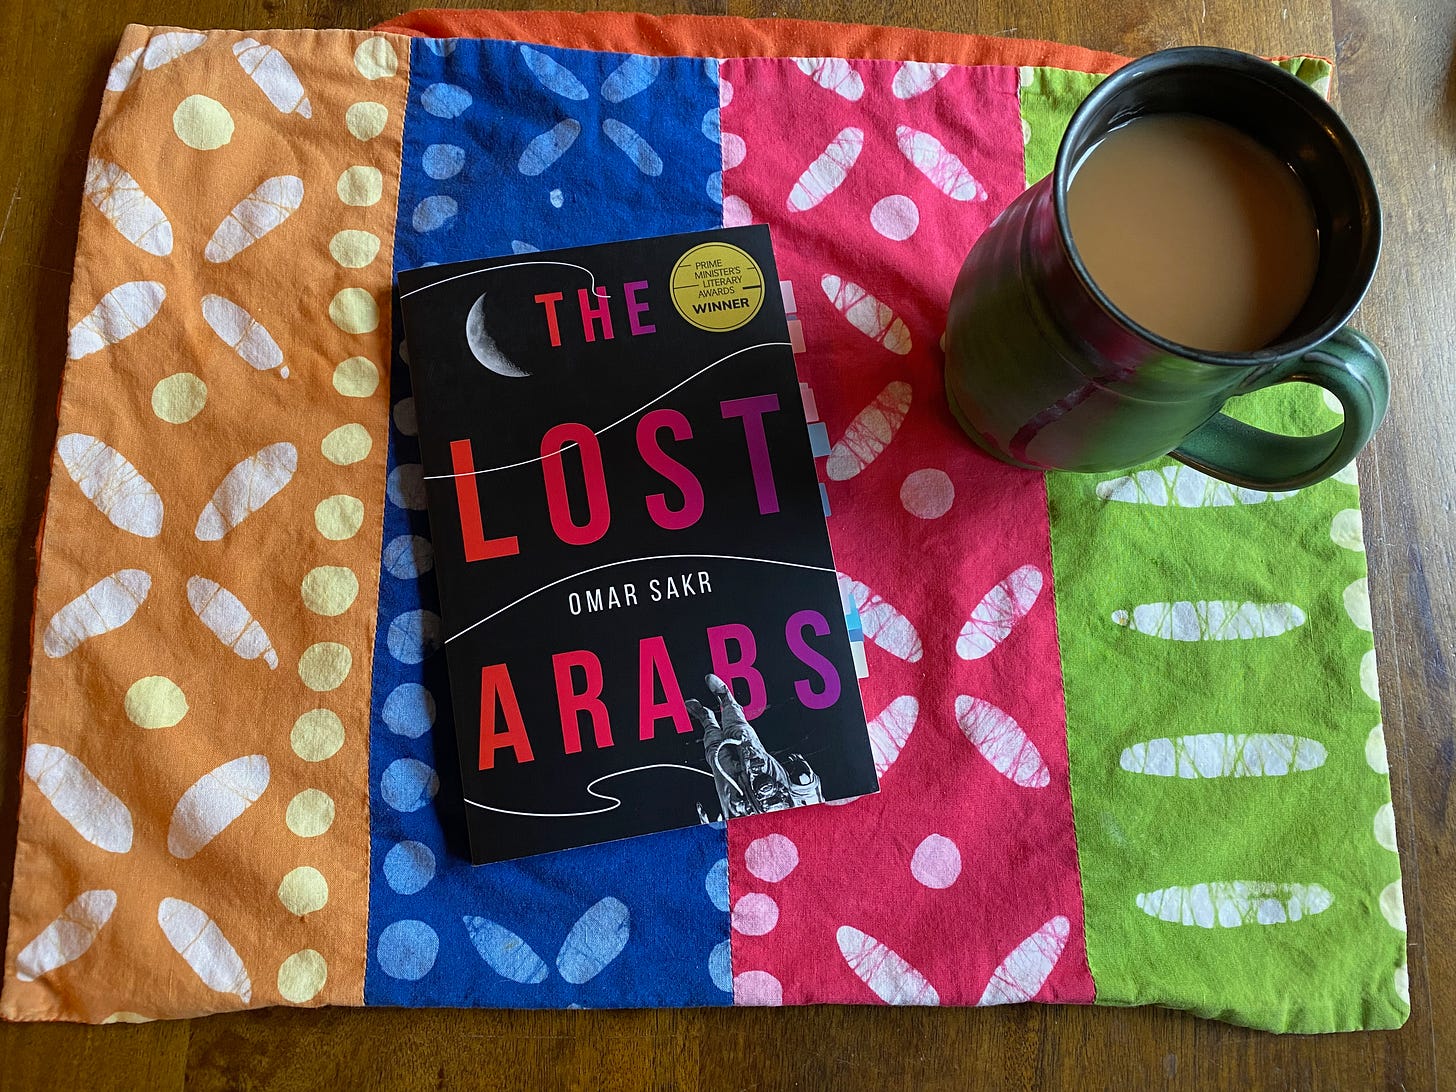 The Lost Arabs on a colorful placemat next to a mug of tea.